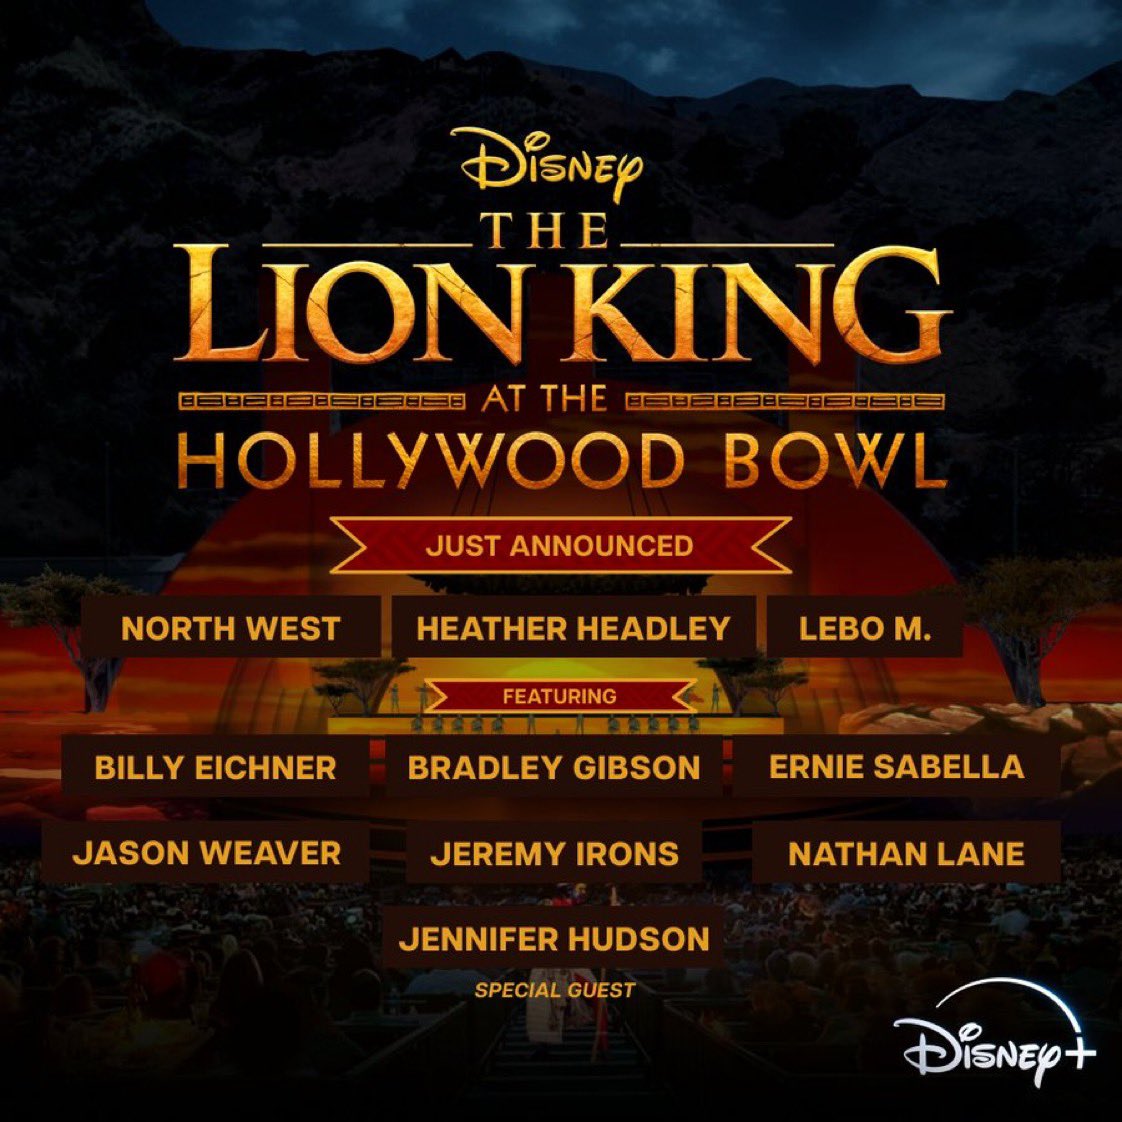 ‘THE LION KING AT THE HOLLYWOOD BOWL’ is coming to Disney+ later this year.

The live-to-film concert event of Disney’s #TheLionKing.